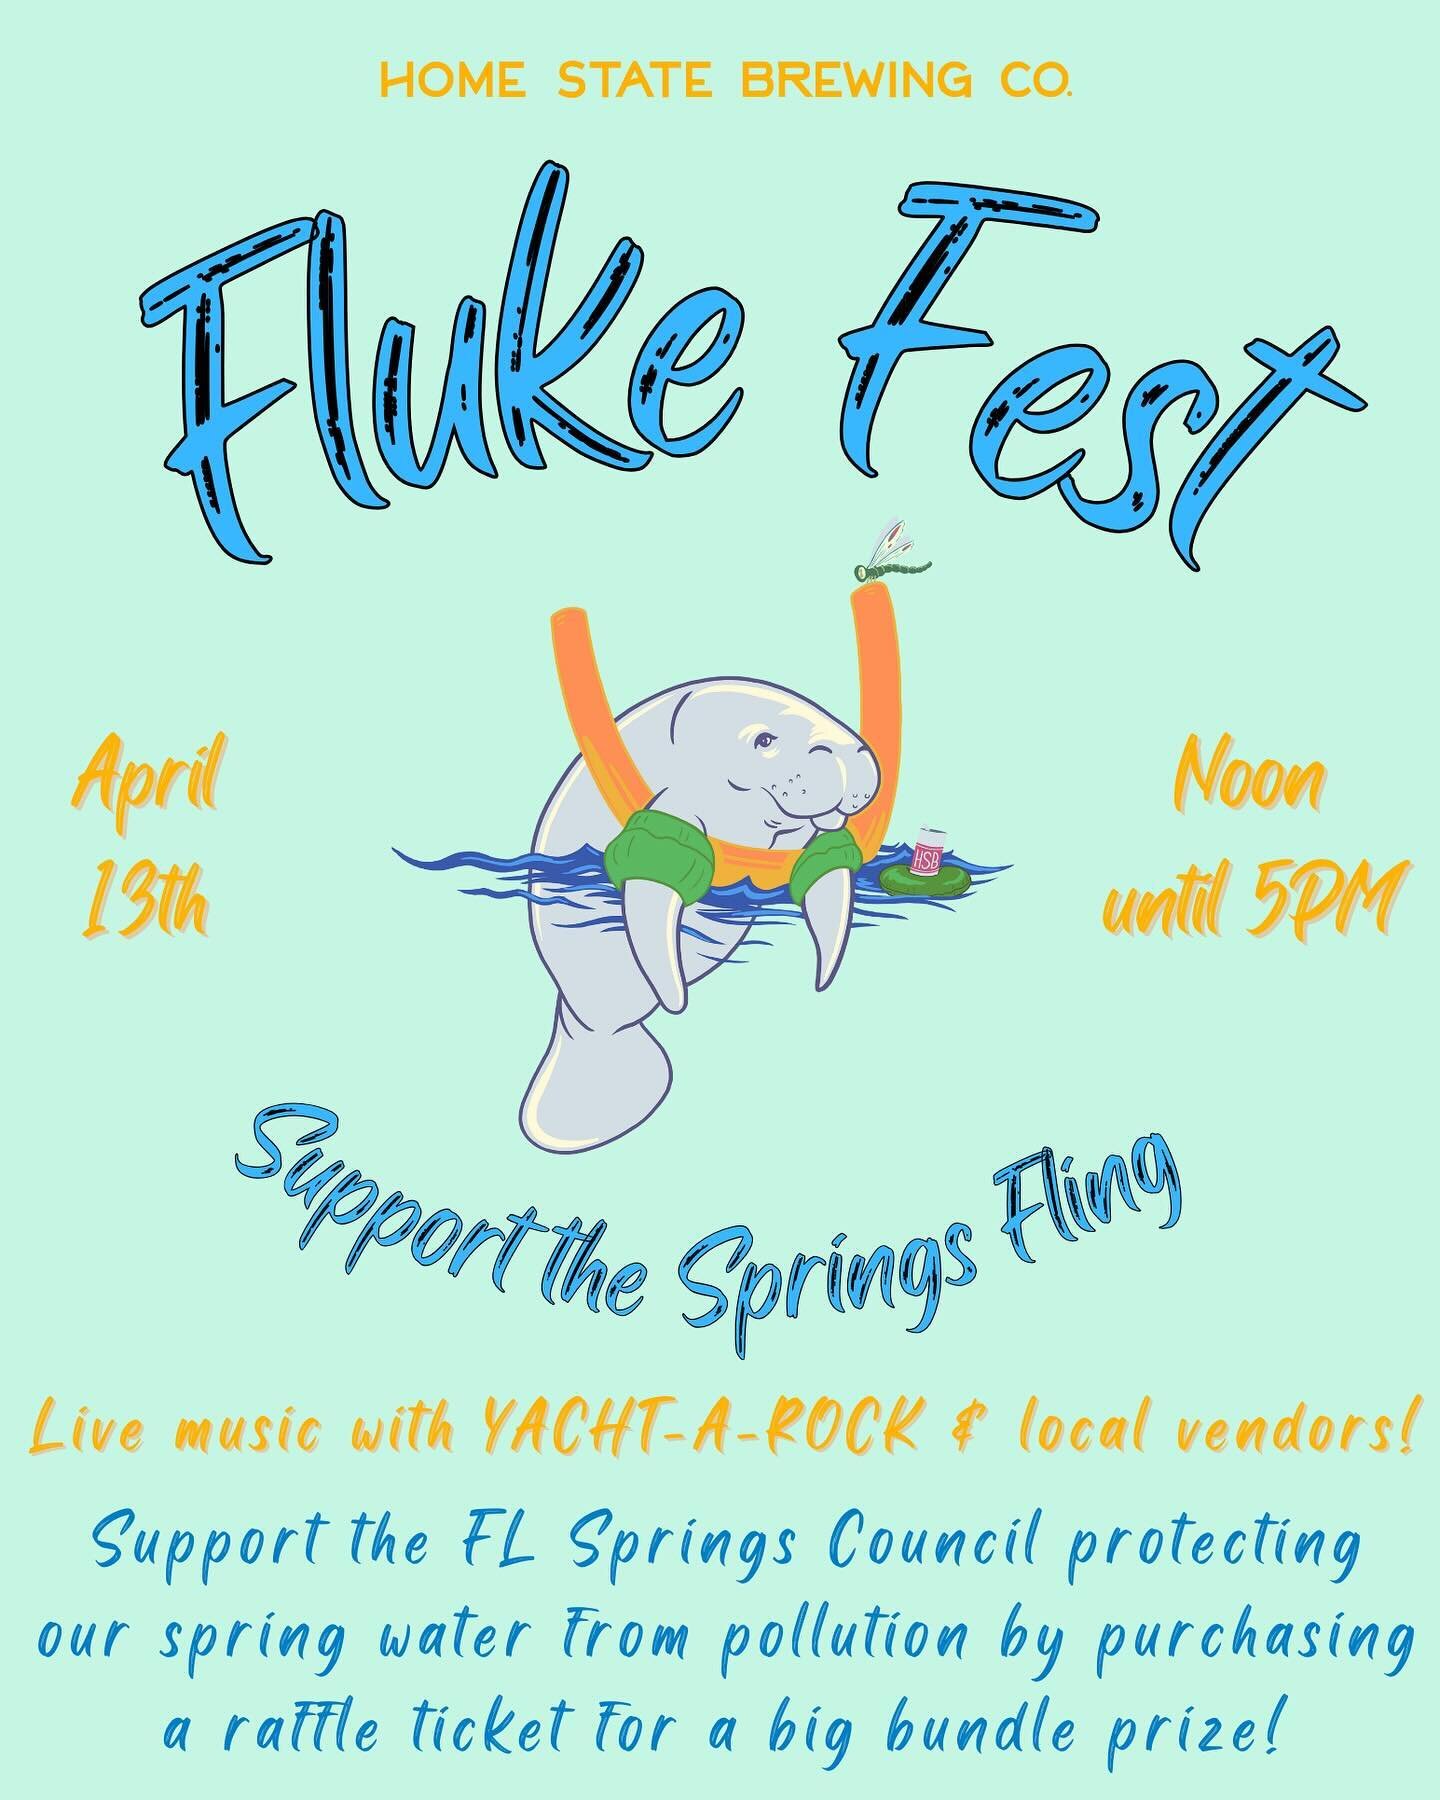 🌊FLUKE FEST🌊
Support the Springs Fling with us April 13th starting at noon! 

🎤Live music with Yacht-A-Rock 
🛍️Local Vendors
🎨Face Painter 
🎟️Raffle 
&amp; more! 

The Florida Springs Council is a 501(c)3 nonprofit organization focused on advoc